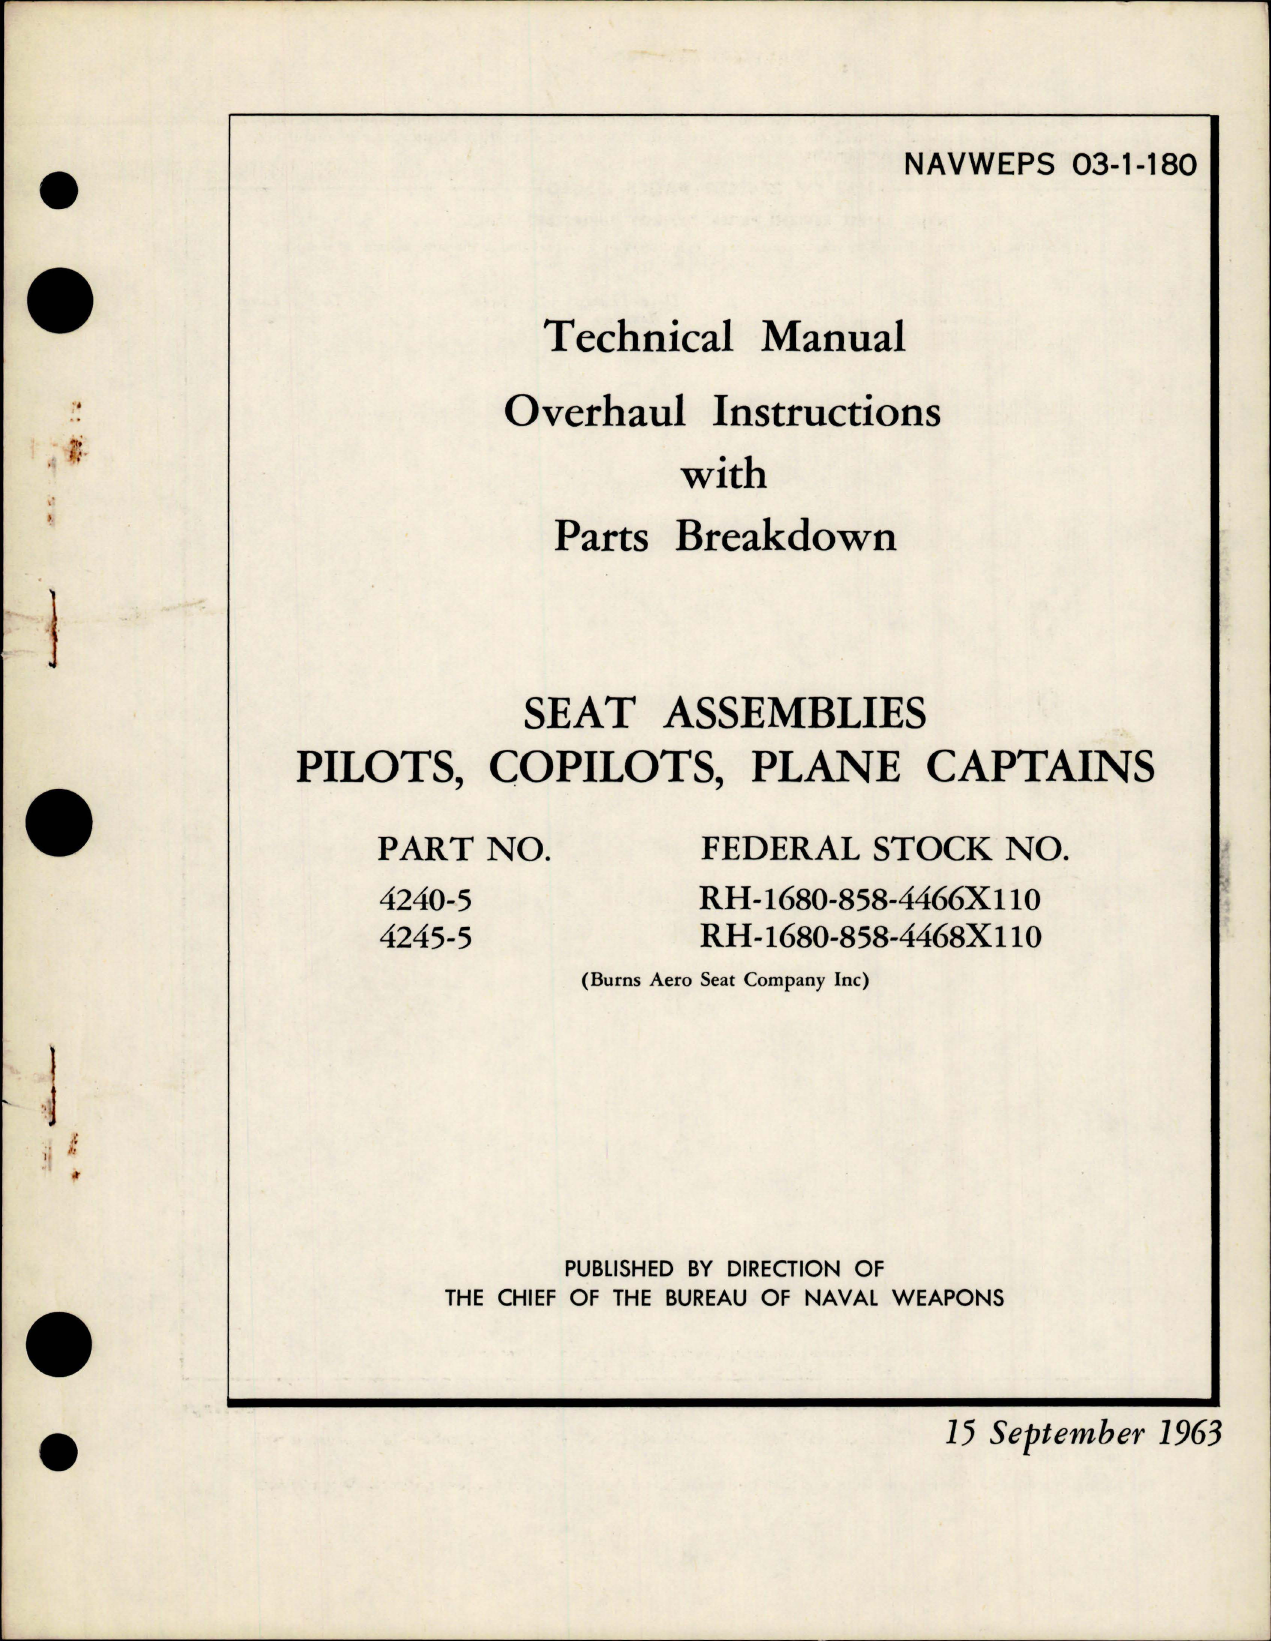 Sample page 1 from AirCorps Library document: Overhaul Instructions with Parts for Pilots, Copilots and Captains Seat Assemblies - Parts 4240-5 and 4245-5 